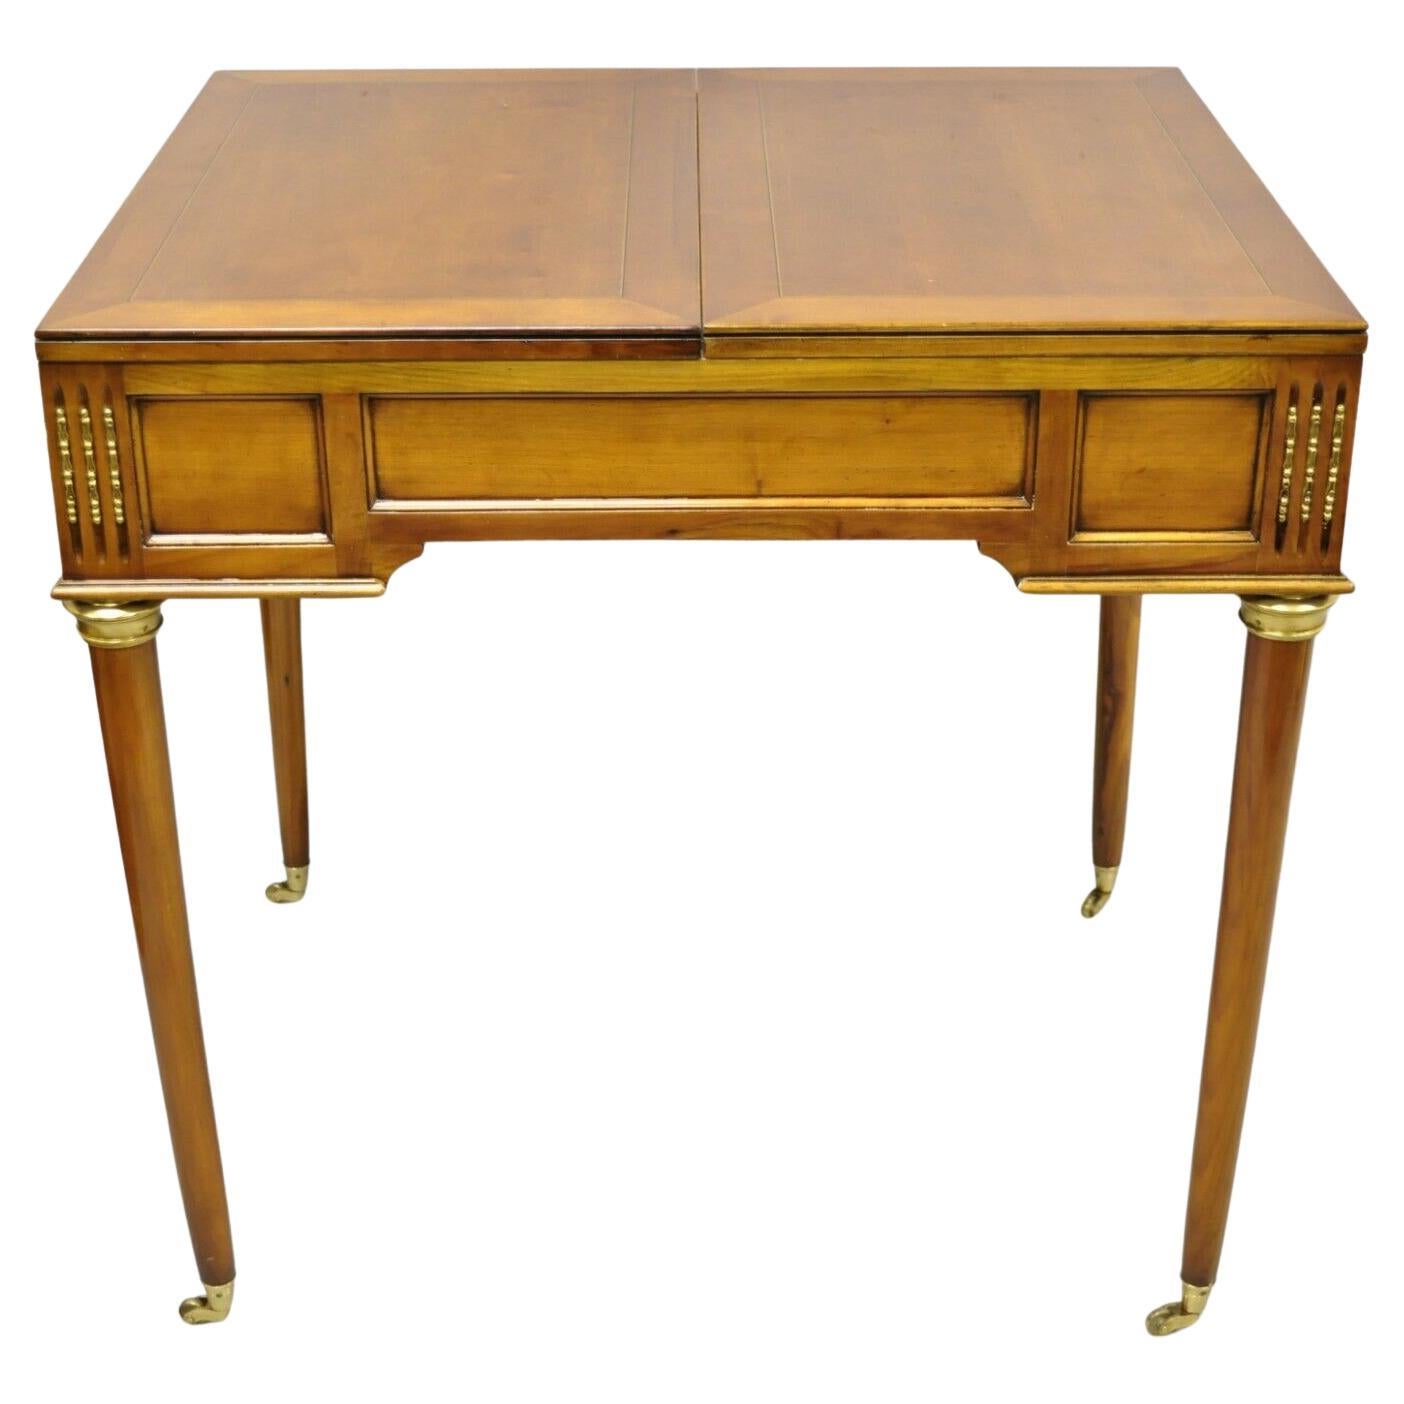 French Louis XVI Style Cherry Wood Flip Top Game Table with Brass Wheels